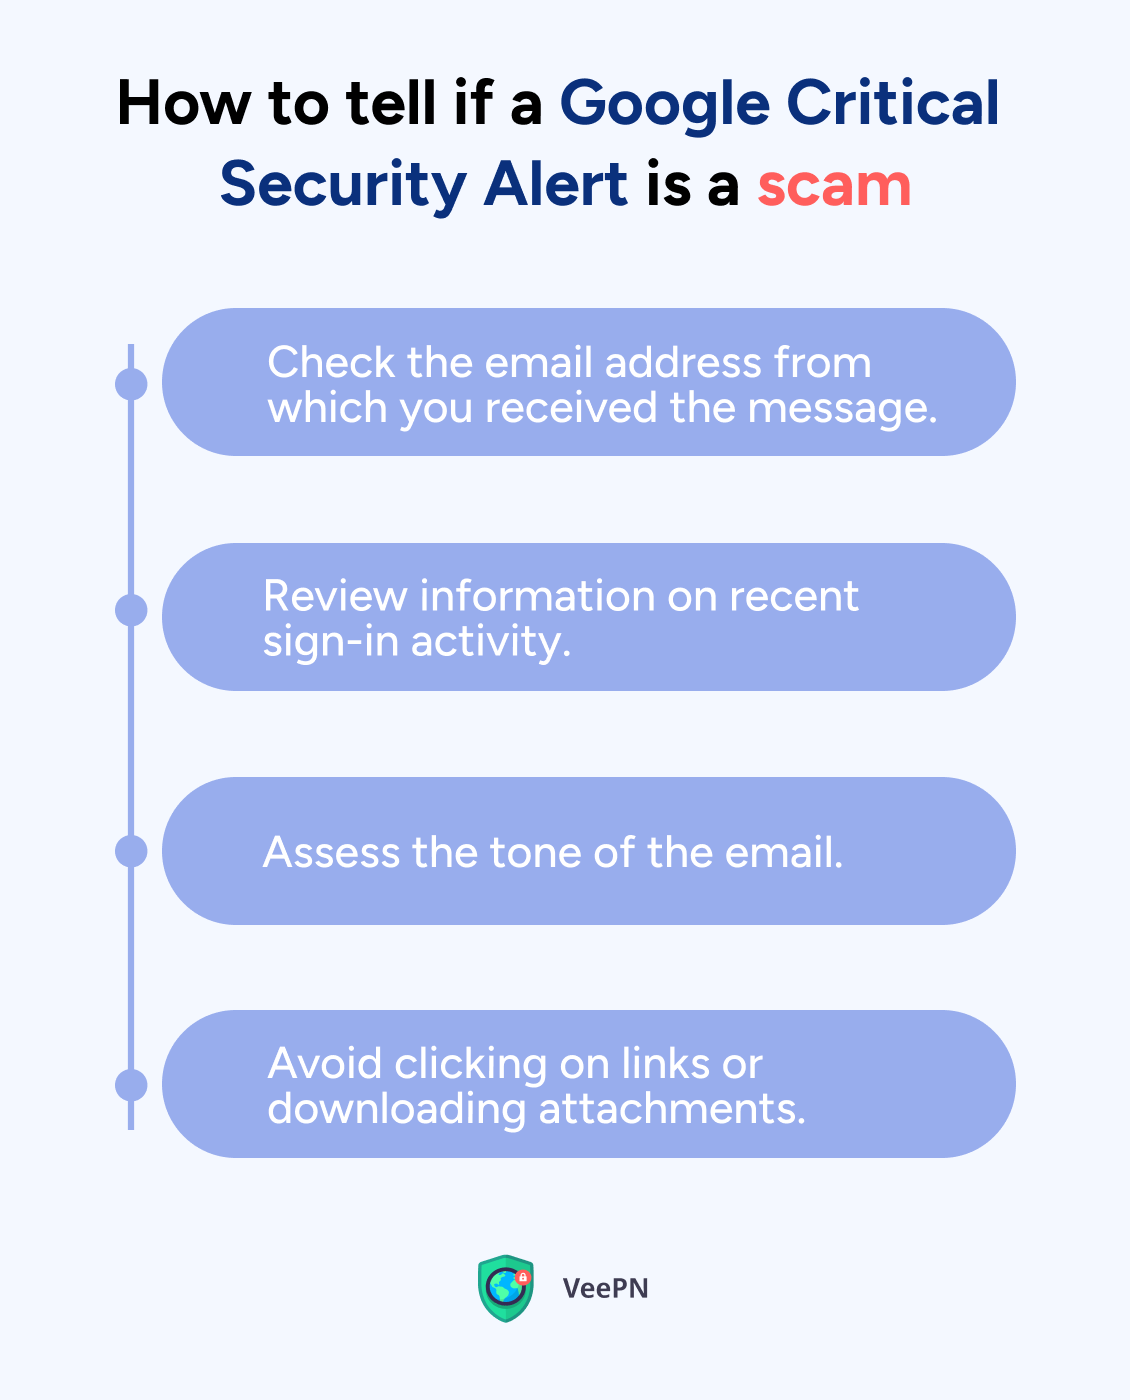 How do I know if my Google security alert is real?